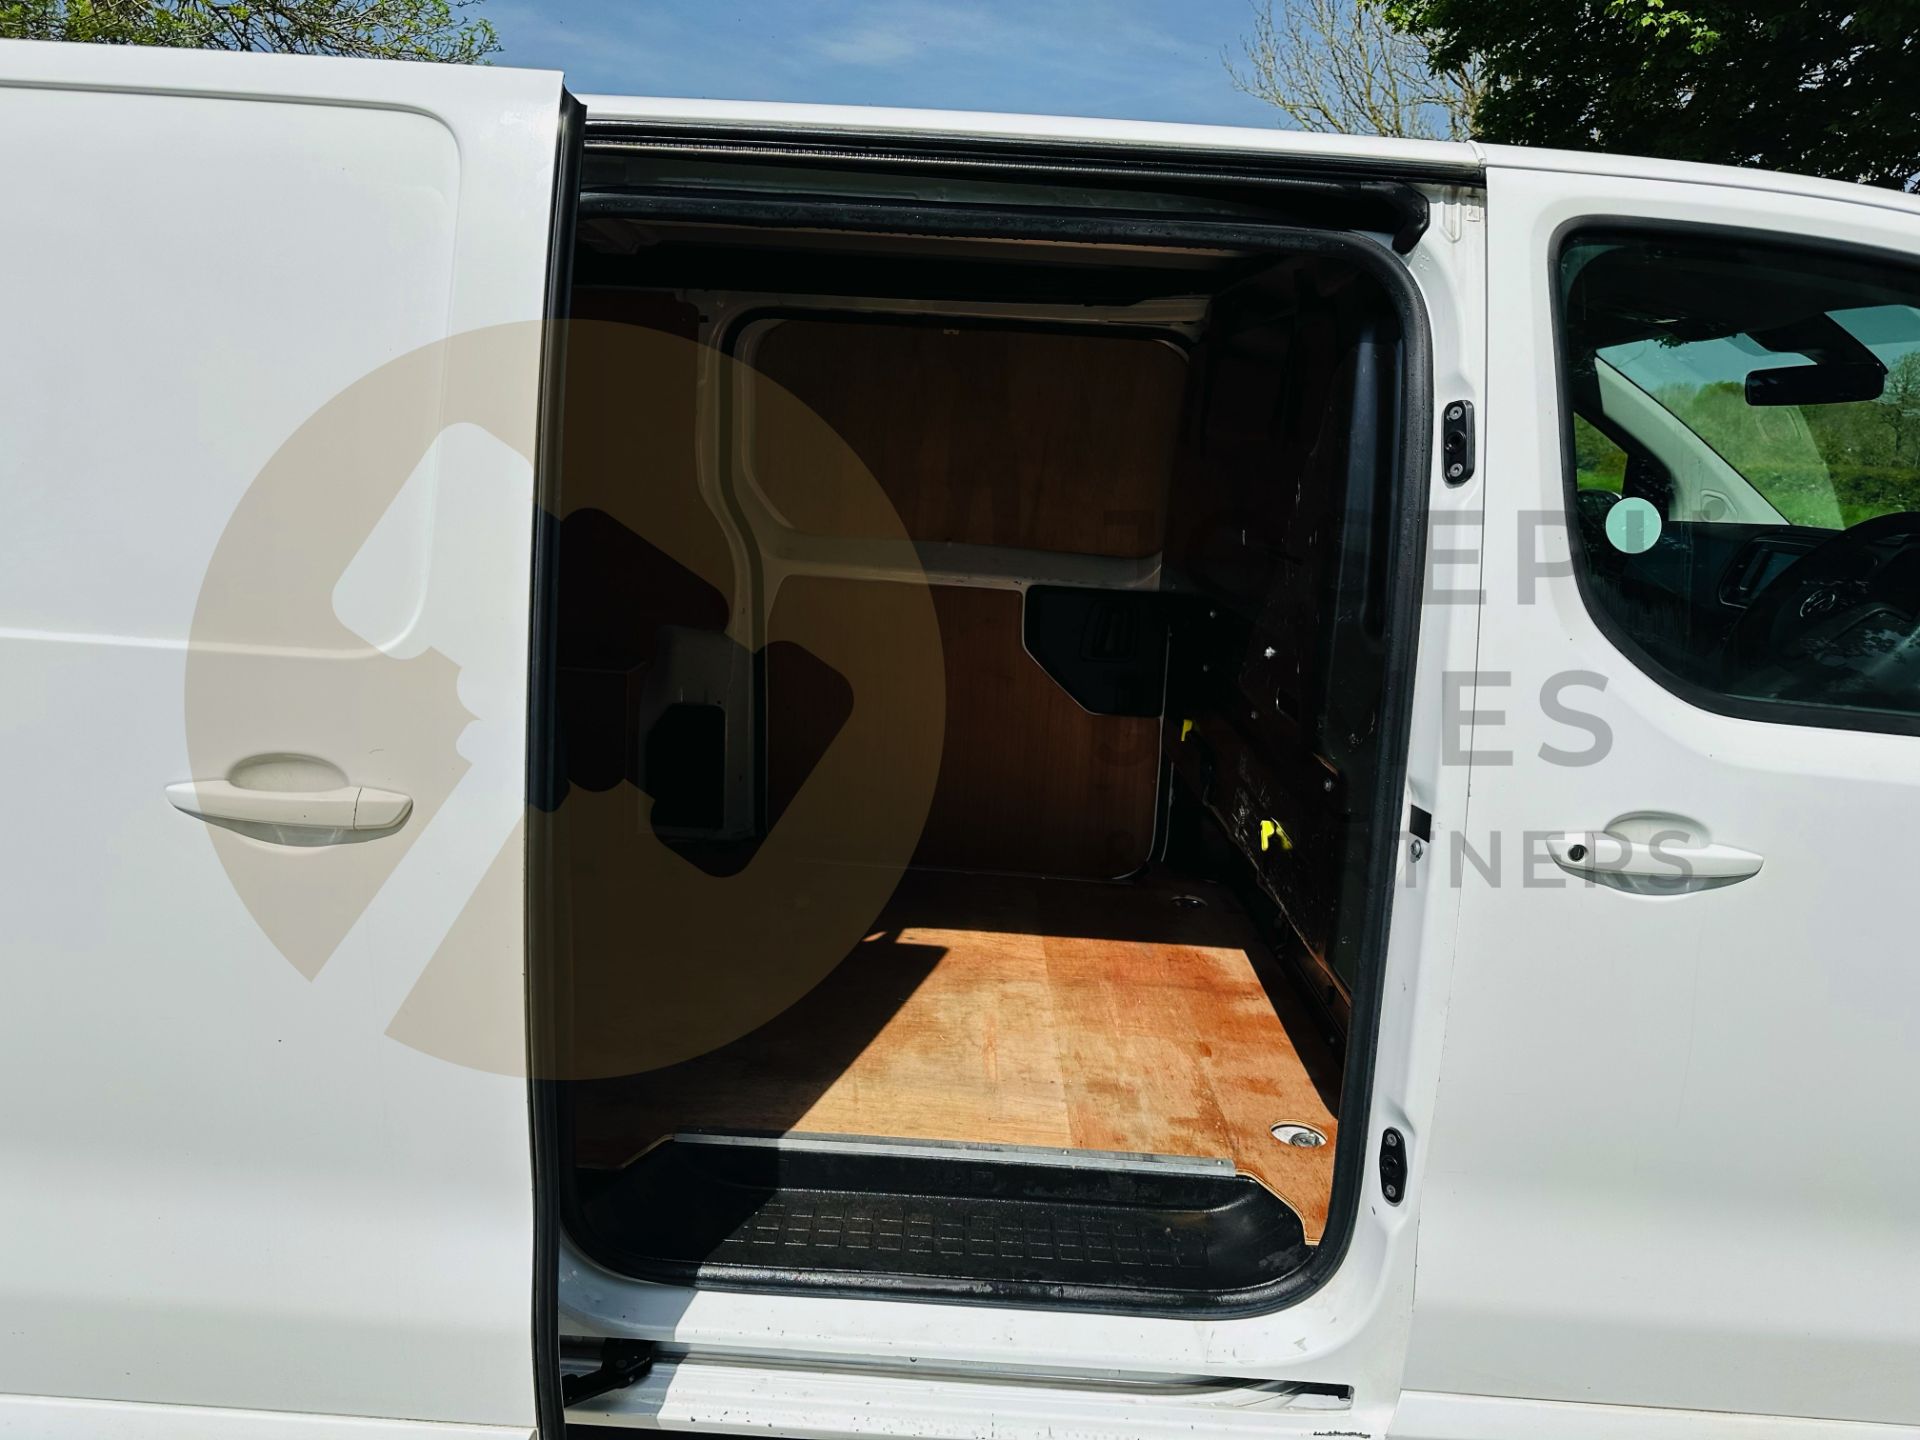 (On Sale) VAUXHALL VIVARO 2900 S/S *SPORTIVE EDITION* EXTENDED FRAME (BLUEINJECTION) - 2020 MODEL - Image 11 of 32